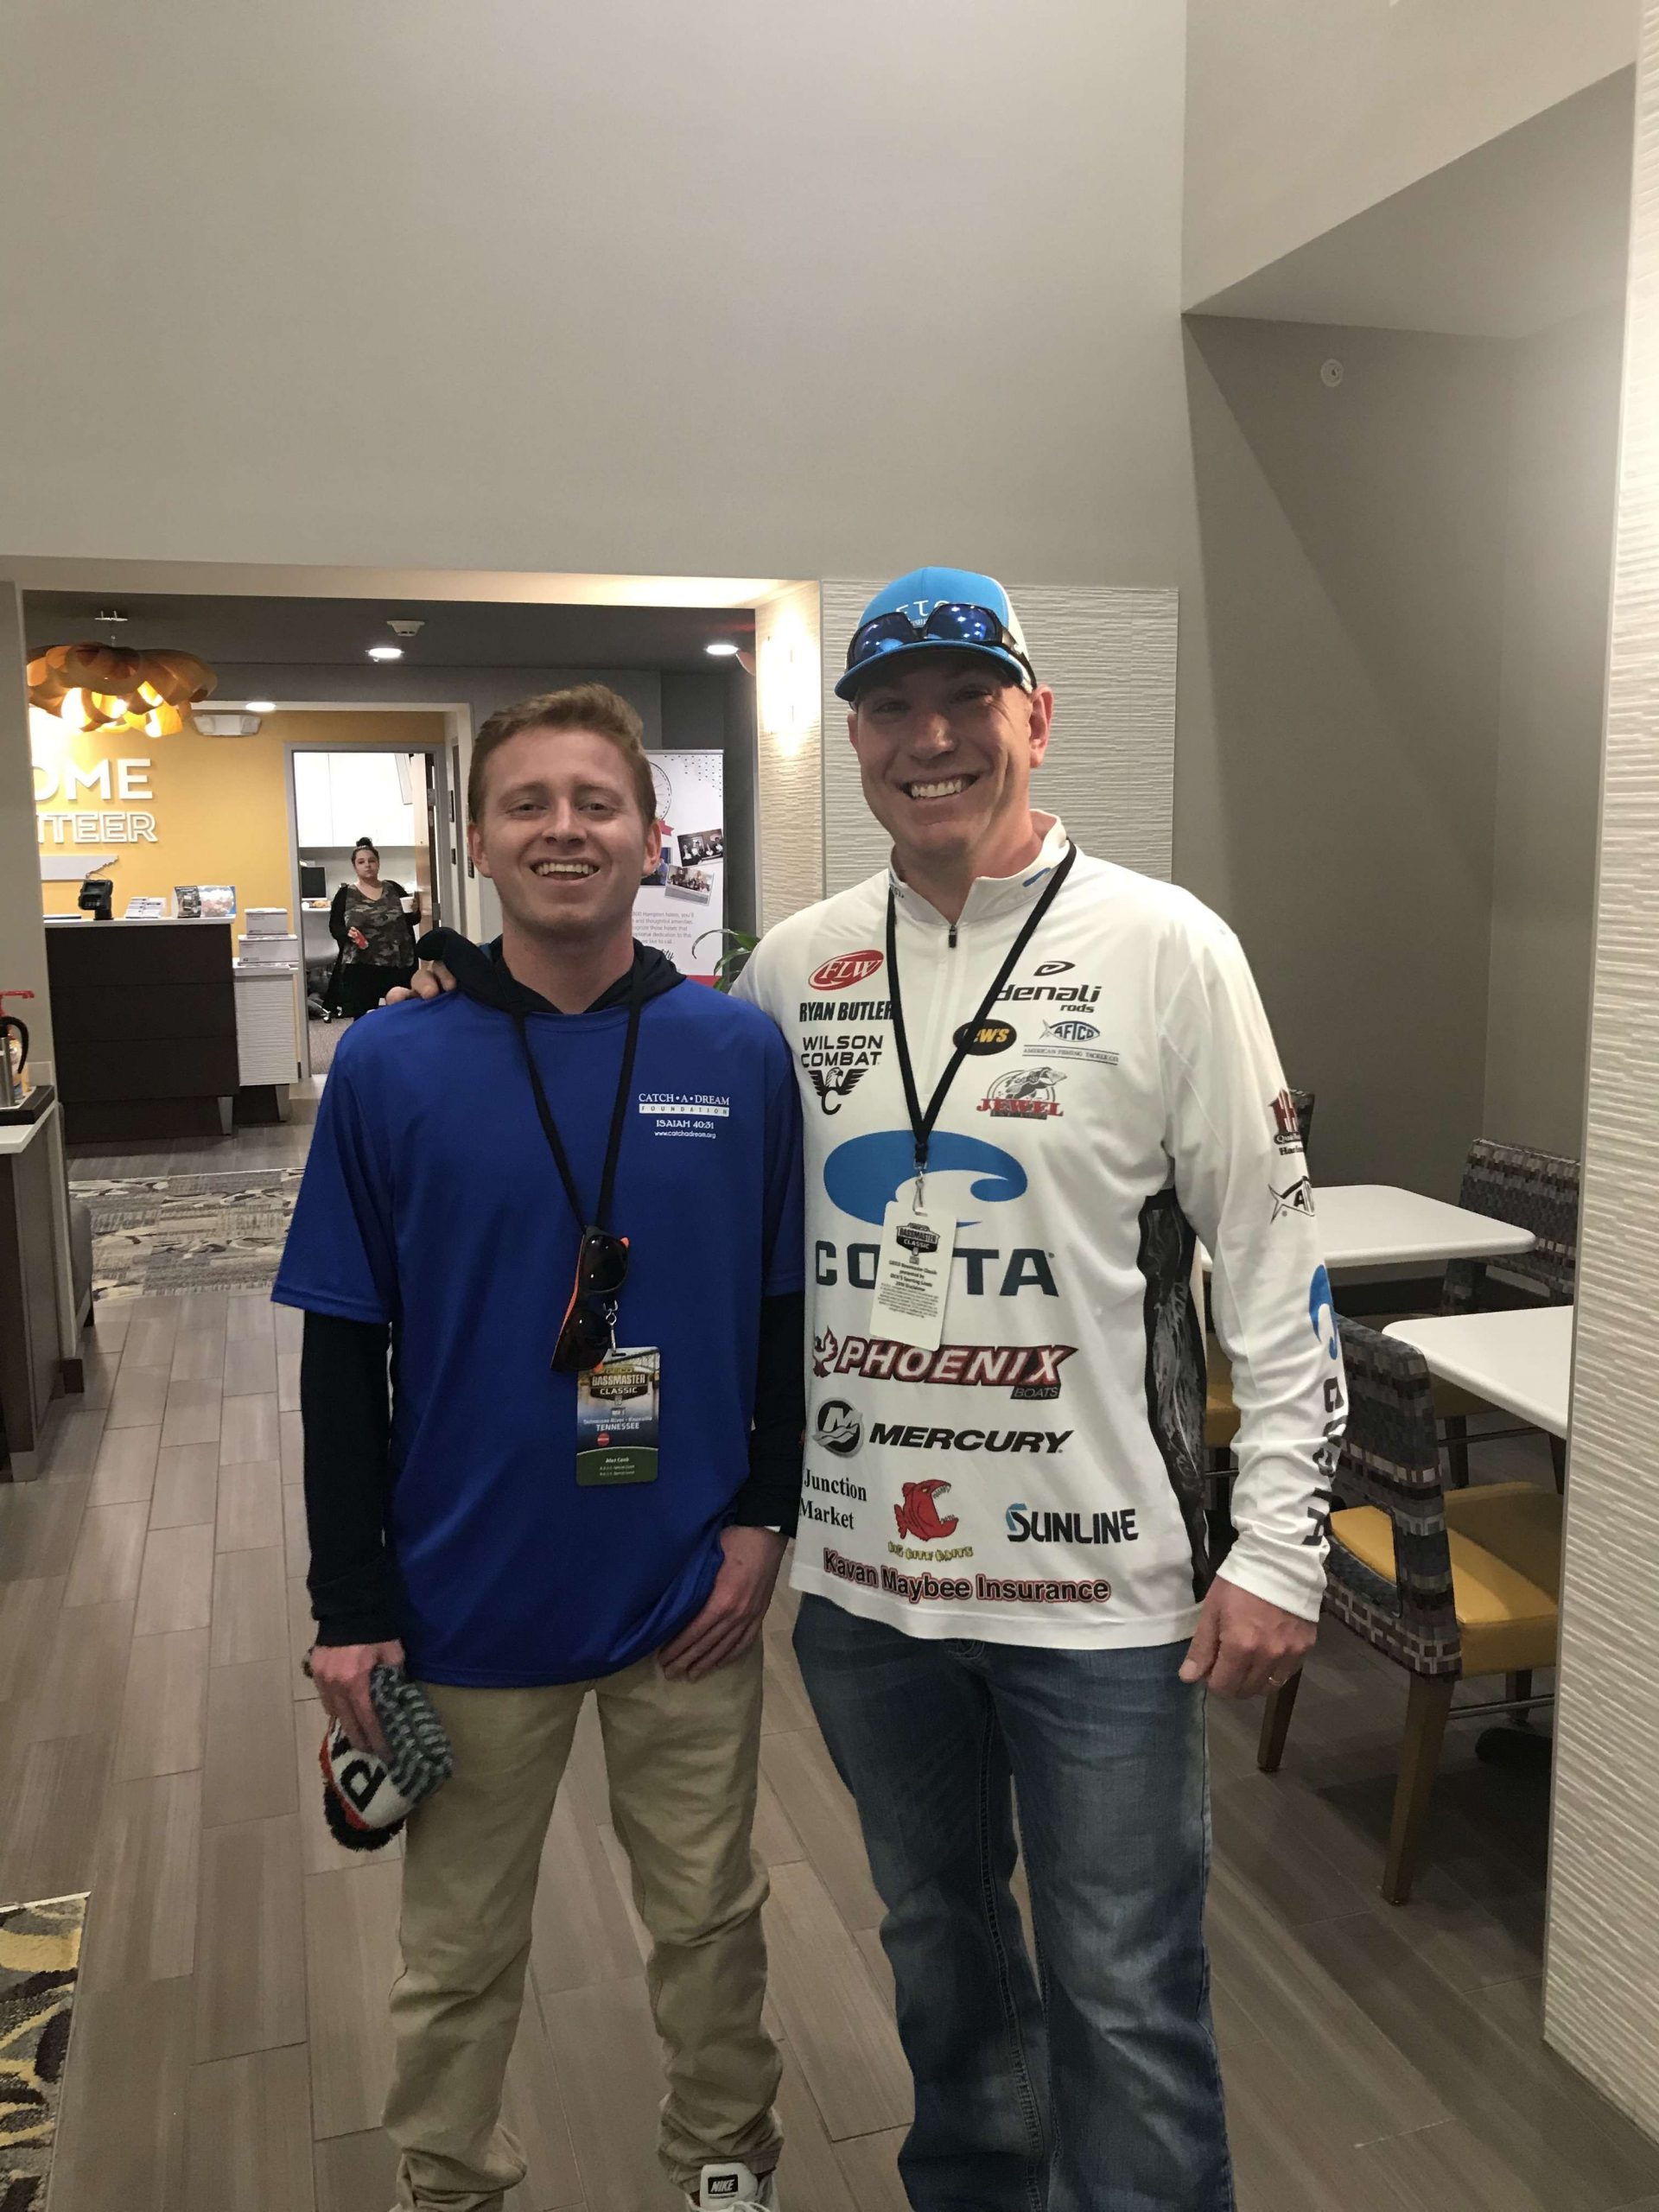 Here he is with Ryan Butler, the 2017 Bassmaster Team Champion representative that competed in the 2018 Bassmaster Classic.